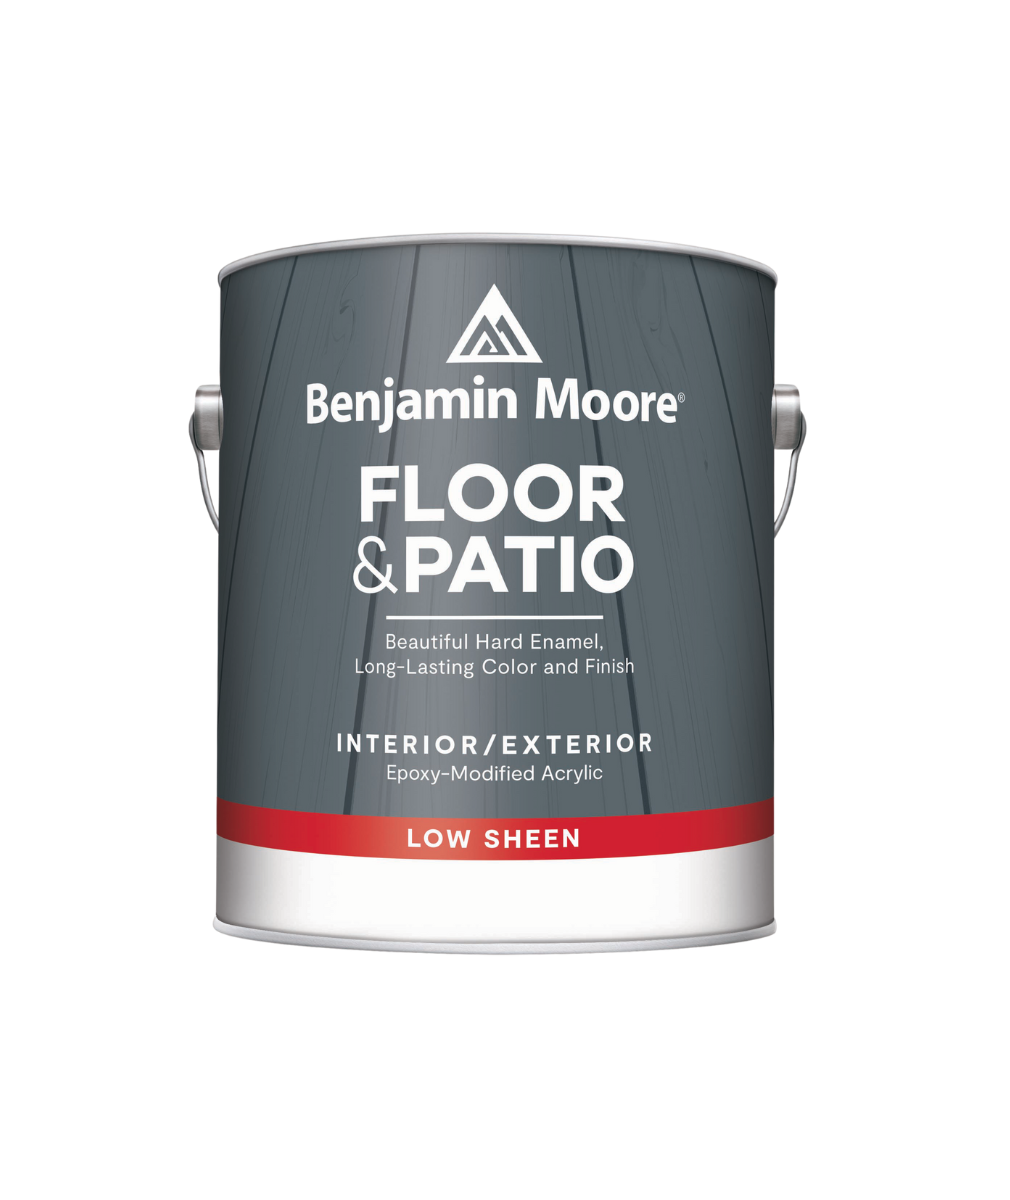 Benjamin Moore floor and patio low sheen Interior Paint available at Catalina Paints.